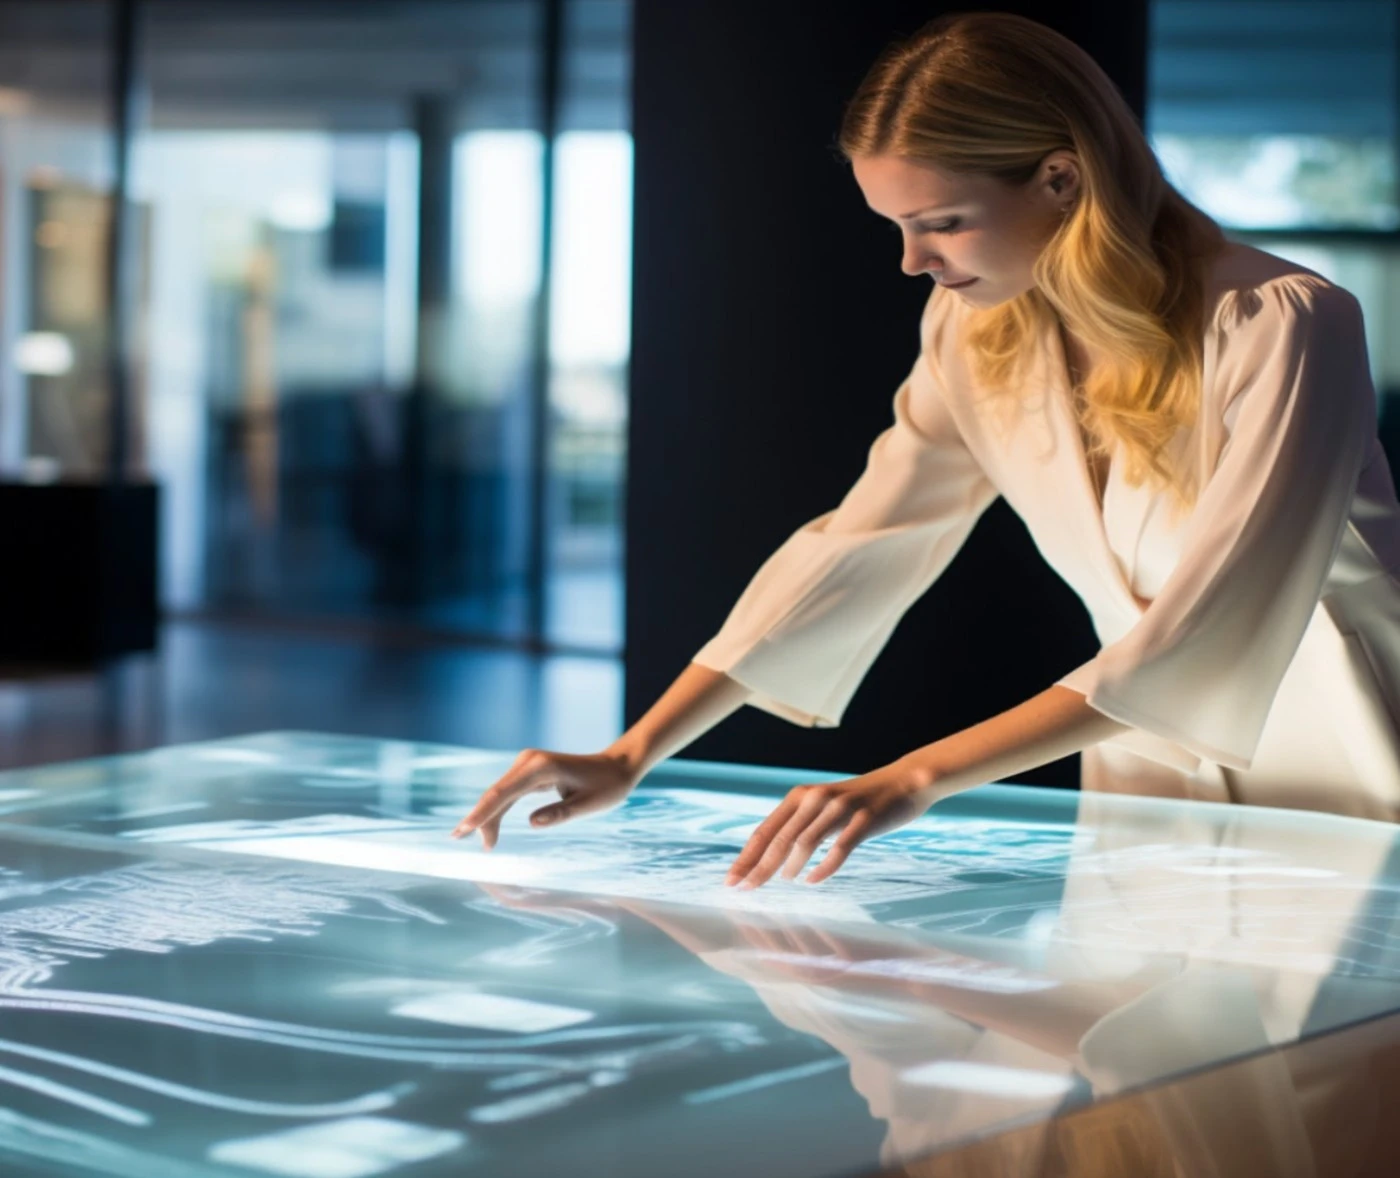 Multi-touch apps are software applications designed to recognize and respond to input from multiple simultaneous touch points on a touchscreen or touch-sensitive surface.